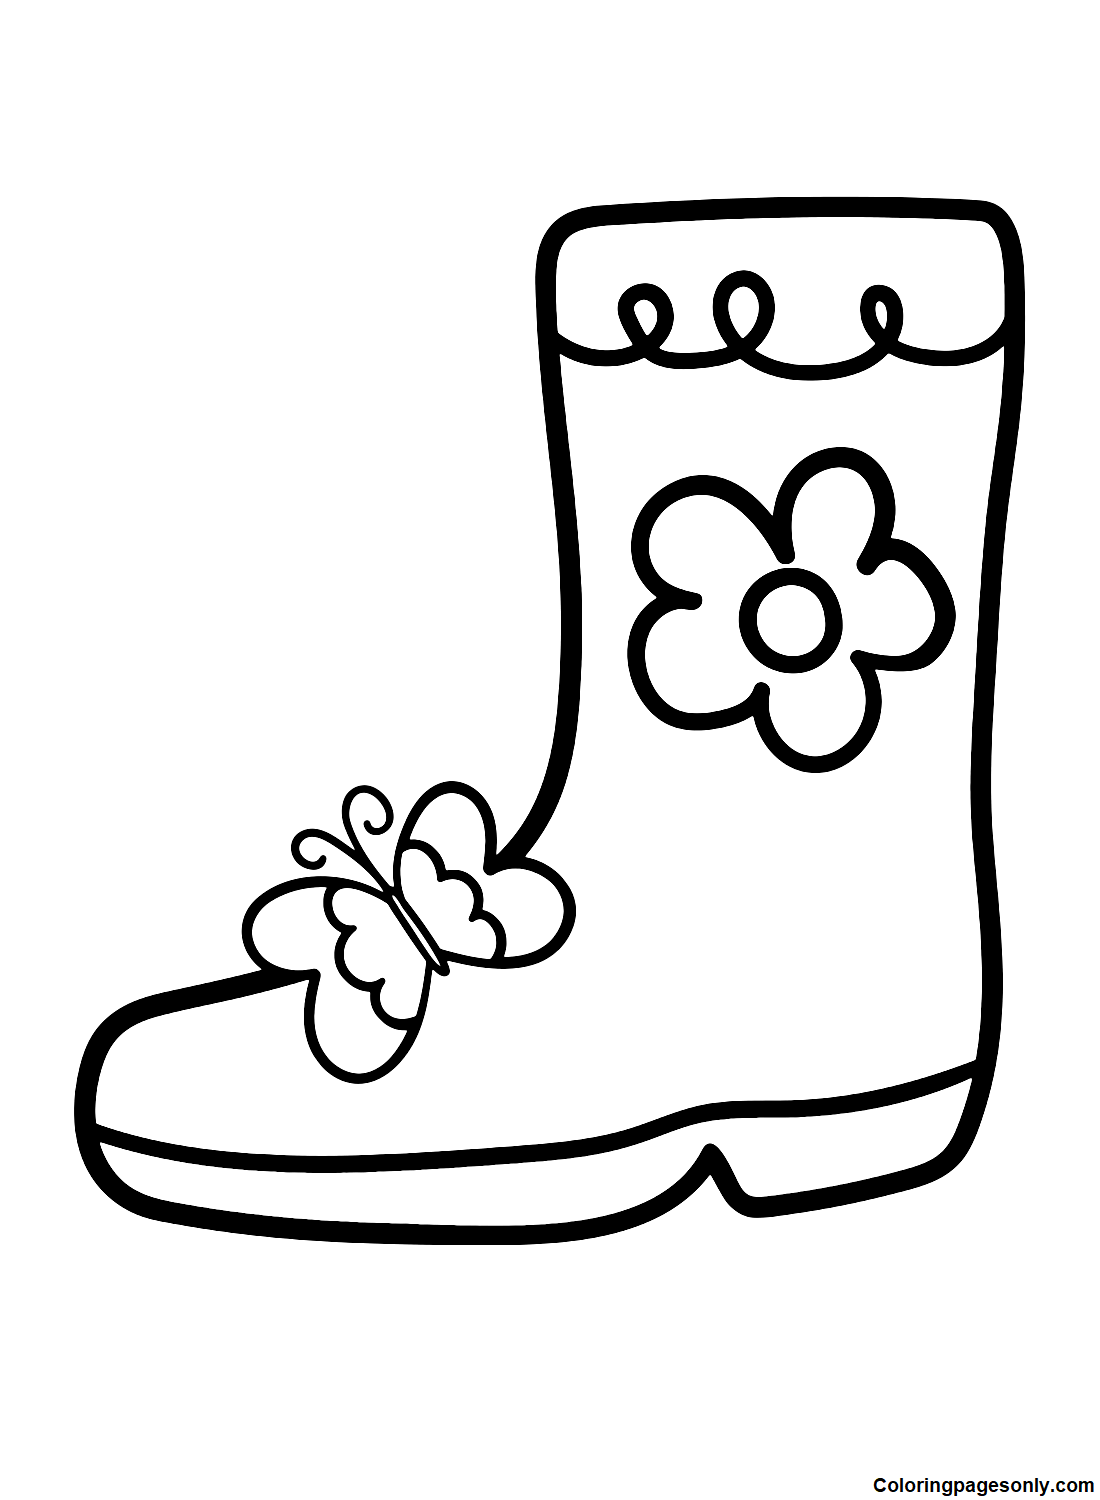 Cute Boots with Flower from Boots